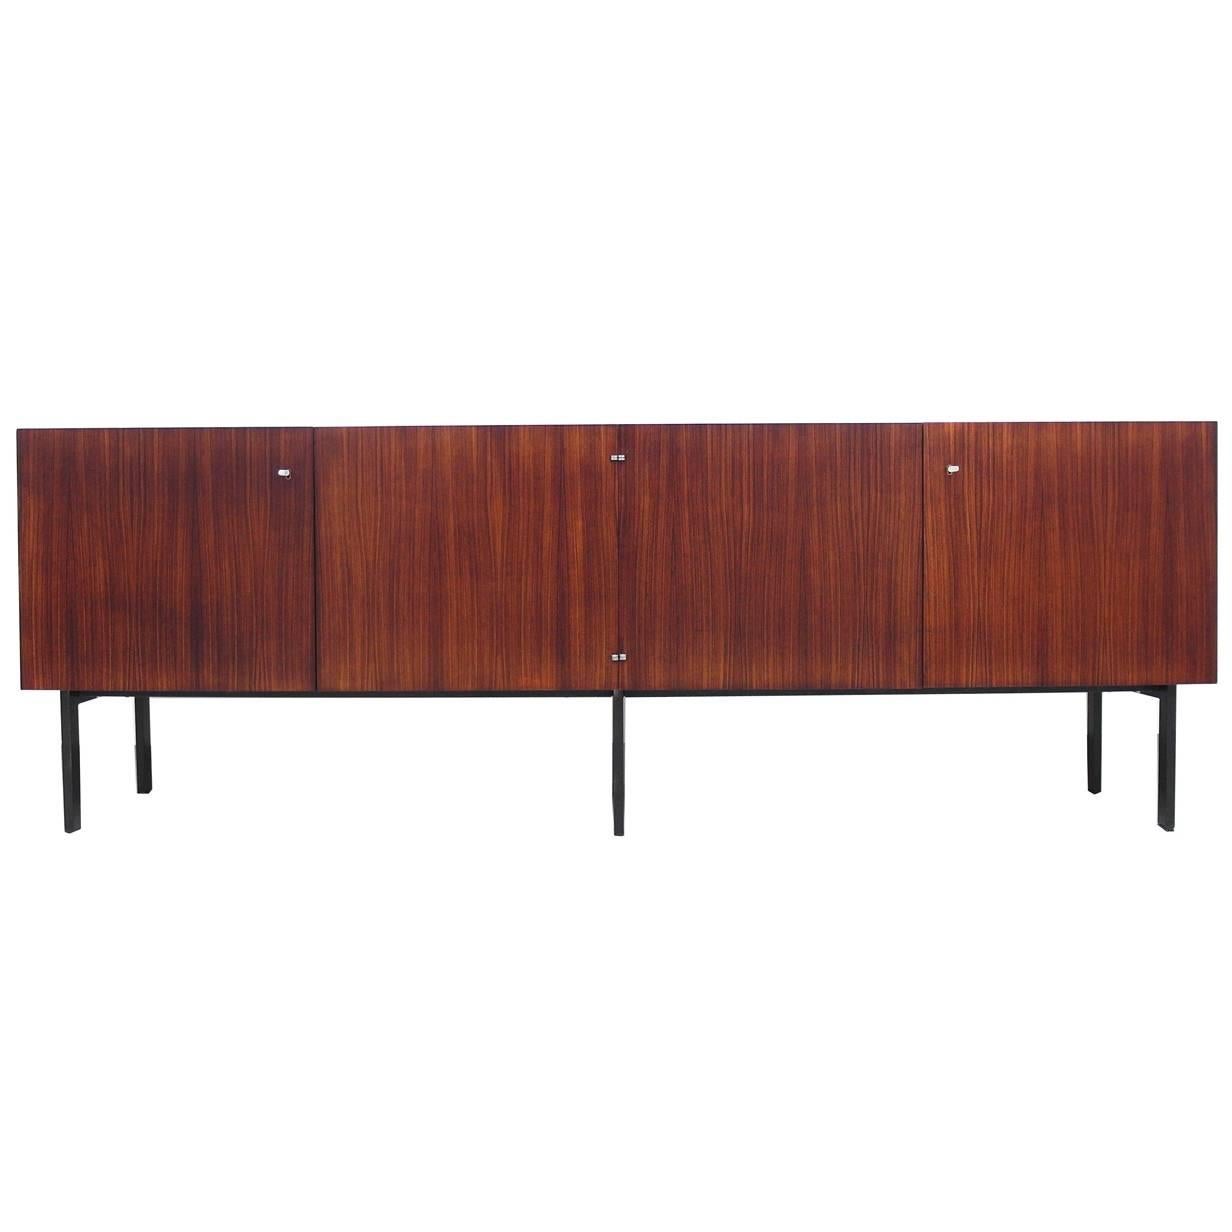 Rosewood Sideboard Attributed to Etienne Fermigier for Meubles et Fonction, 1961 For Sale